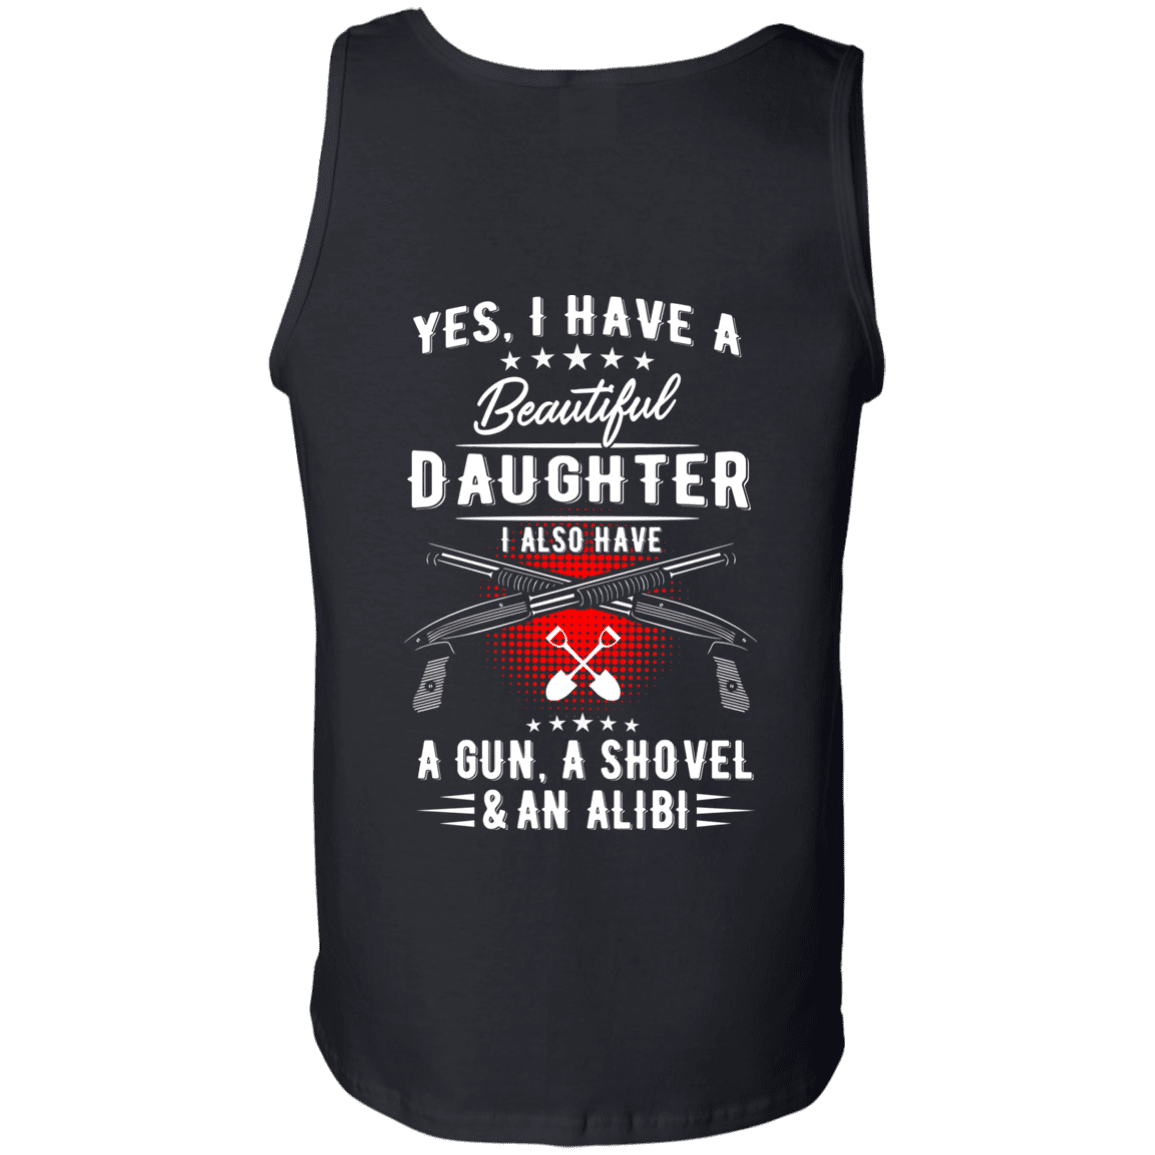 Yes, I Have A Beautiful Daughter, I Also have a Gun, a Shovel & an Alibi T-Shirts & Hoodies - American Legend Rider